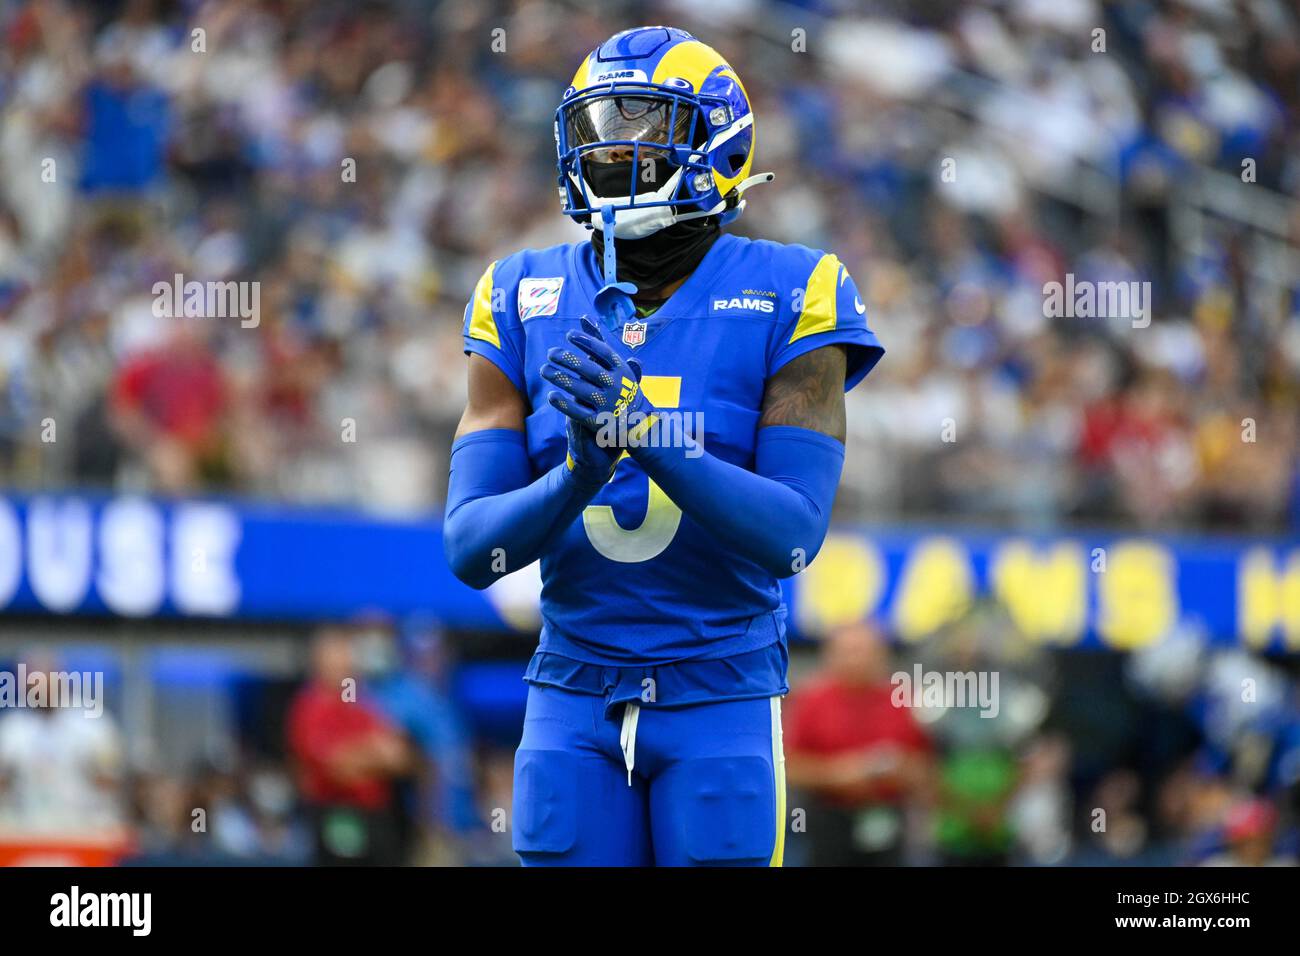 Los Angeles Rams cornerback Jalen Ramsey (5) during an NFL football game  against the Arizona Cardinals, Sunday, Oct. 3, 2021, in Inglewood, Calif.  The Arizona Cardinals defeated the Los Angeles Rams 37-20. (